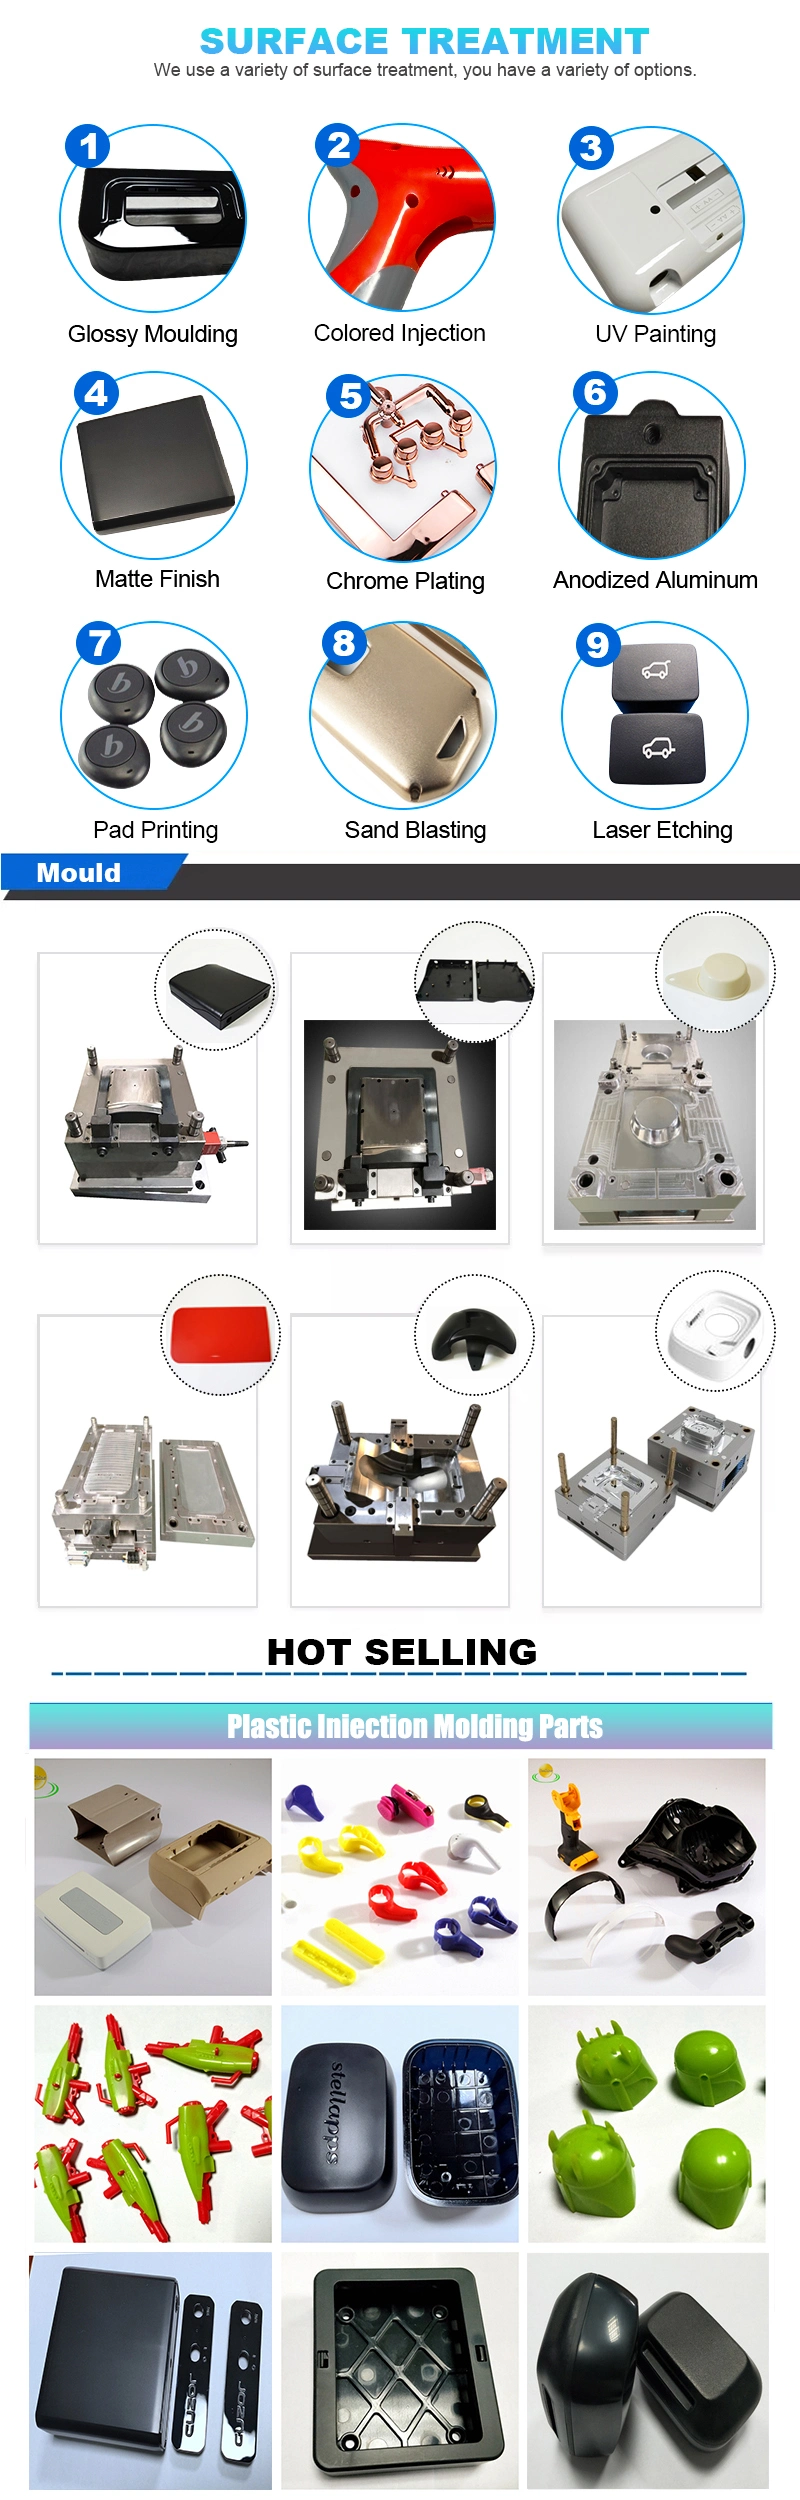 Custom Maker ABS/Rubber/PP/PVC Clear Plastic Injection Molding Service of Plastic Alarm Housing